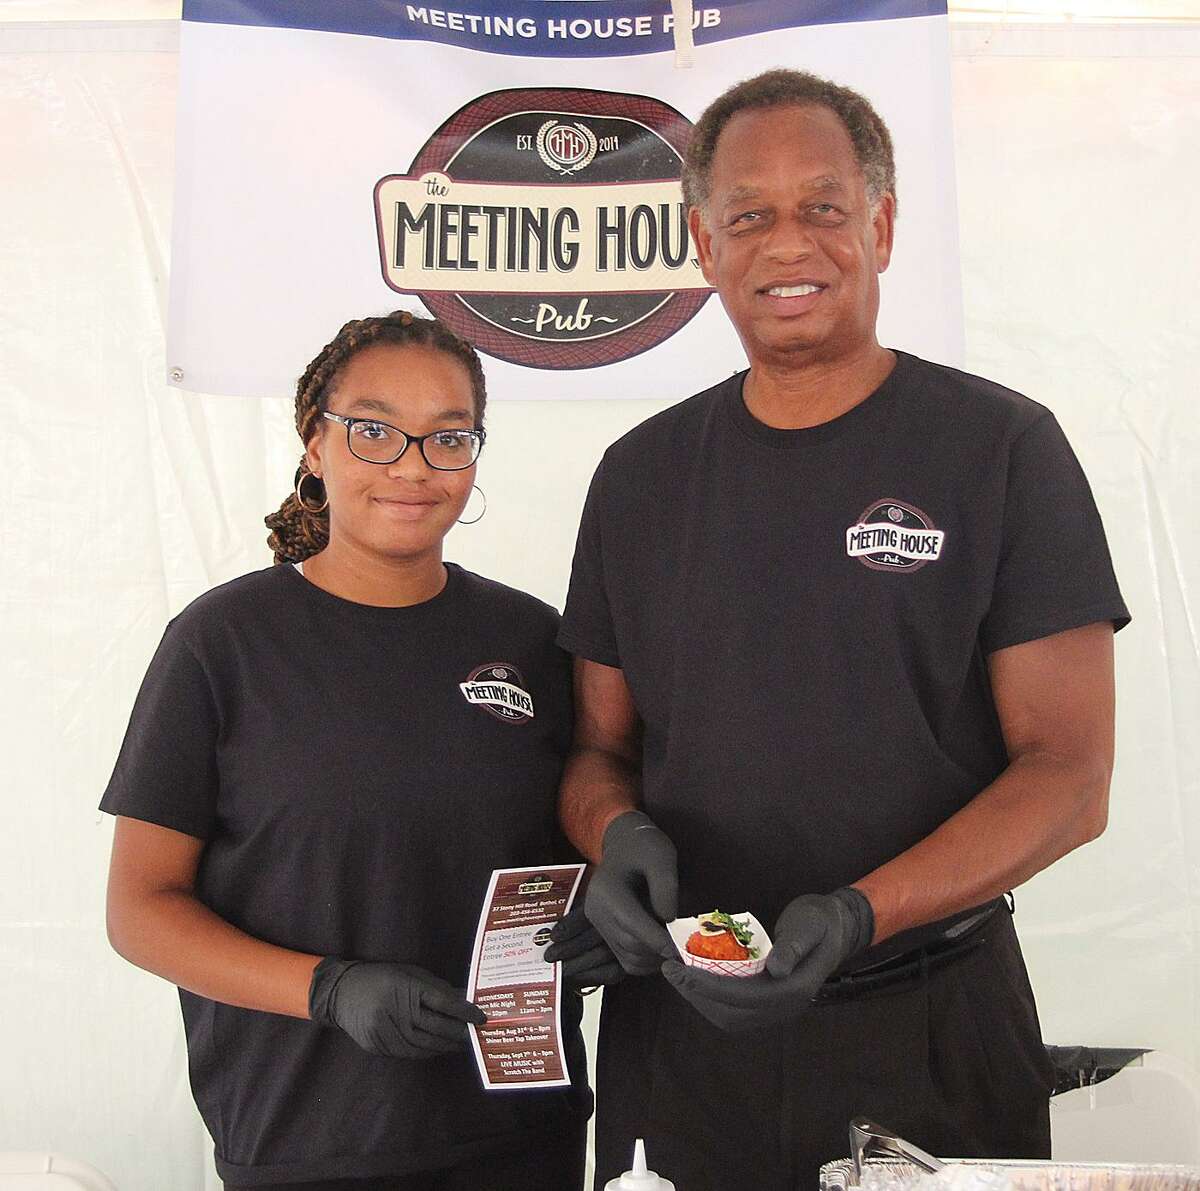 Martin and Miranda Smith of The Meeting House served lasagna balls at the Best of Bethel event held Wednesday, Aug. 23, 2017, at Bennett Memorial Park in Bethel, Conn.